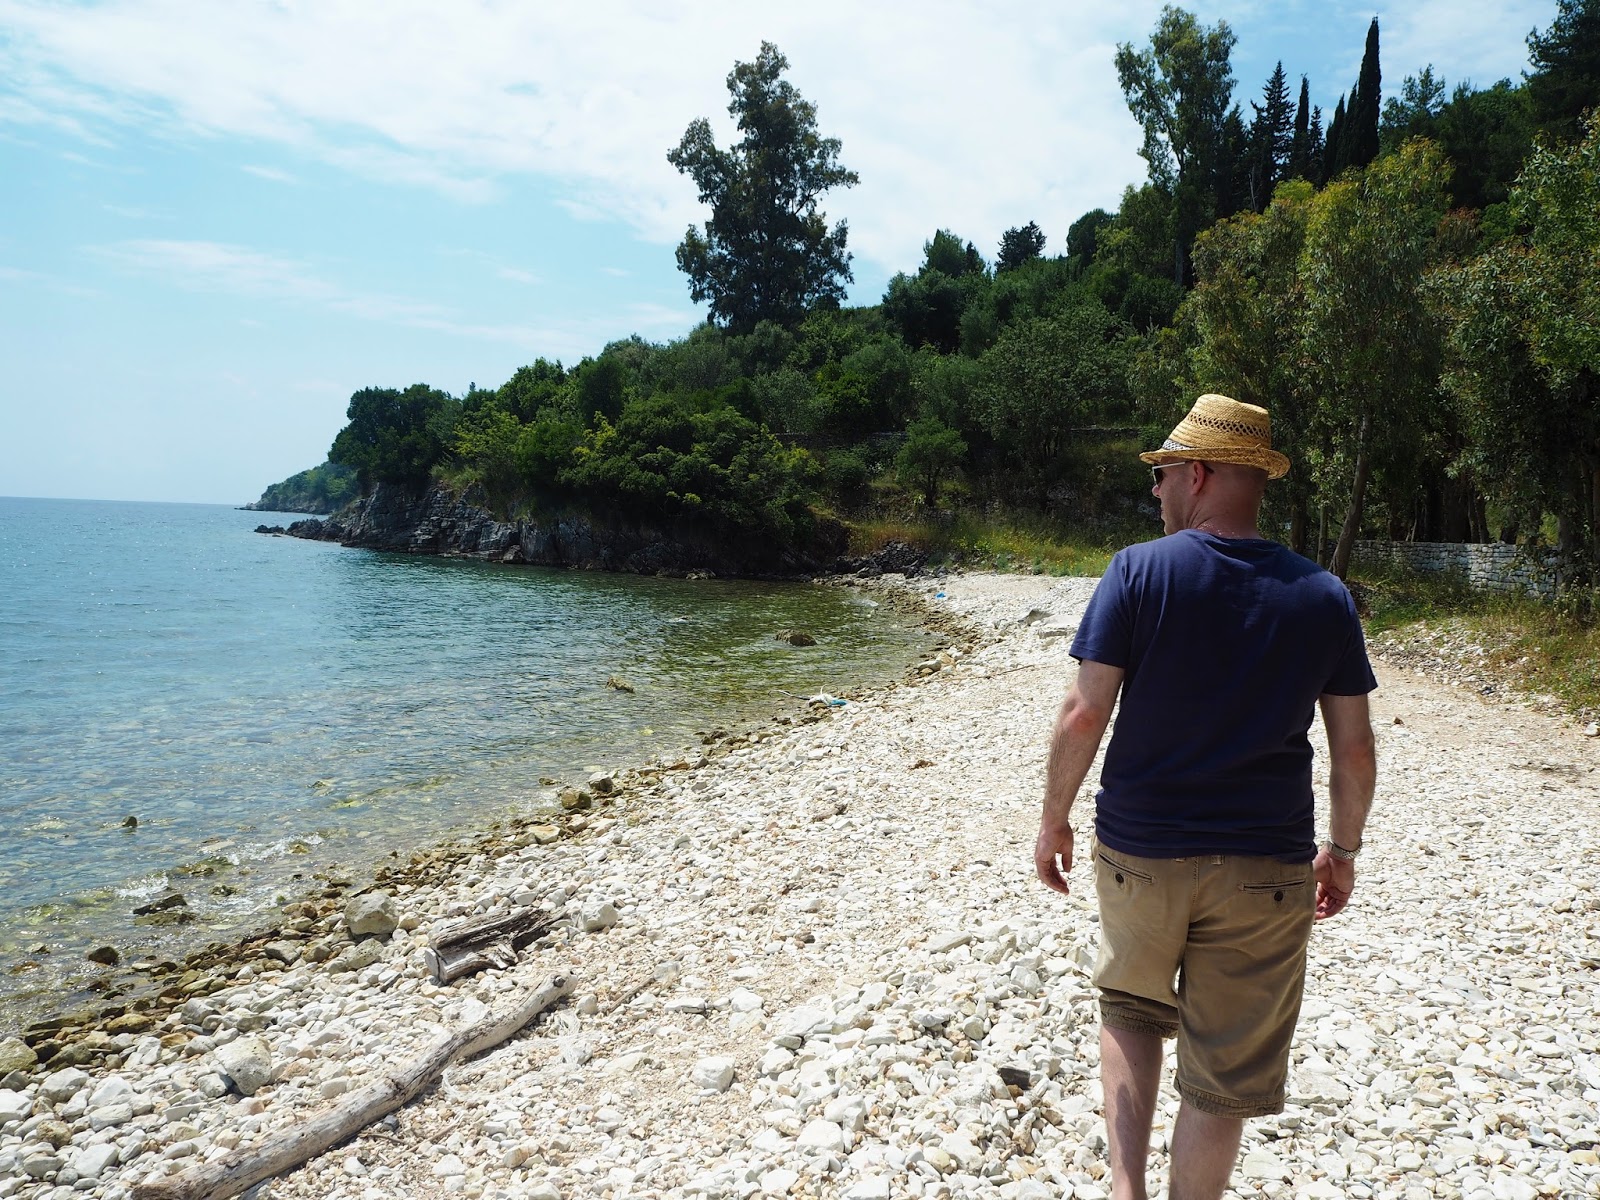 A diary-like description of a holiday in Corfu, Greece